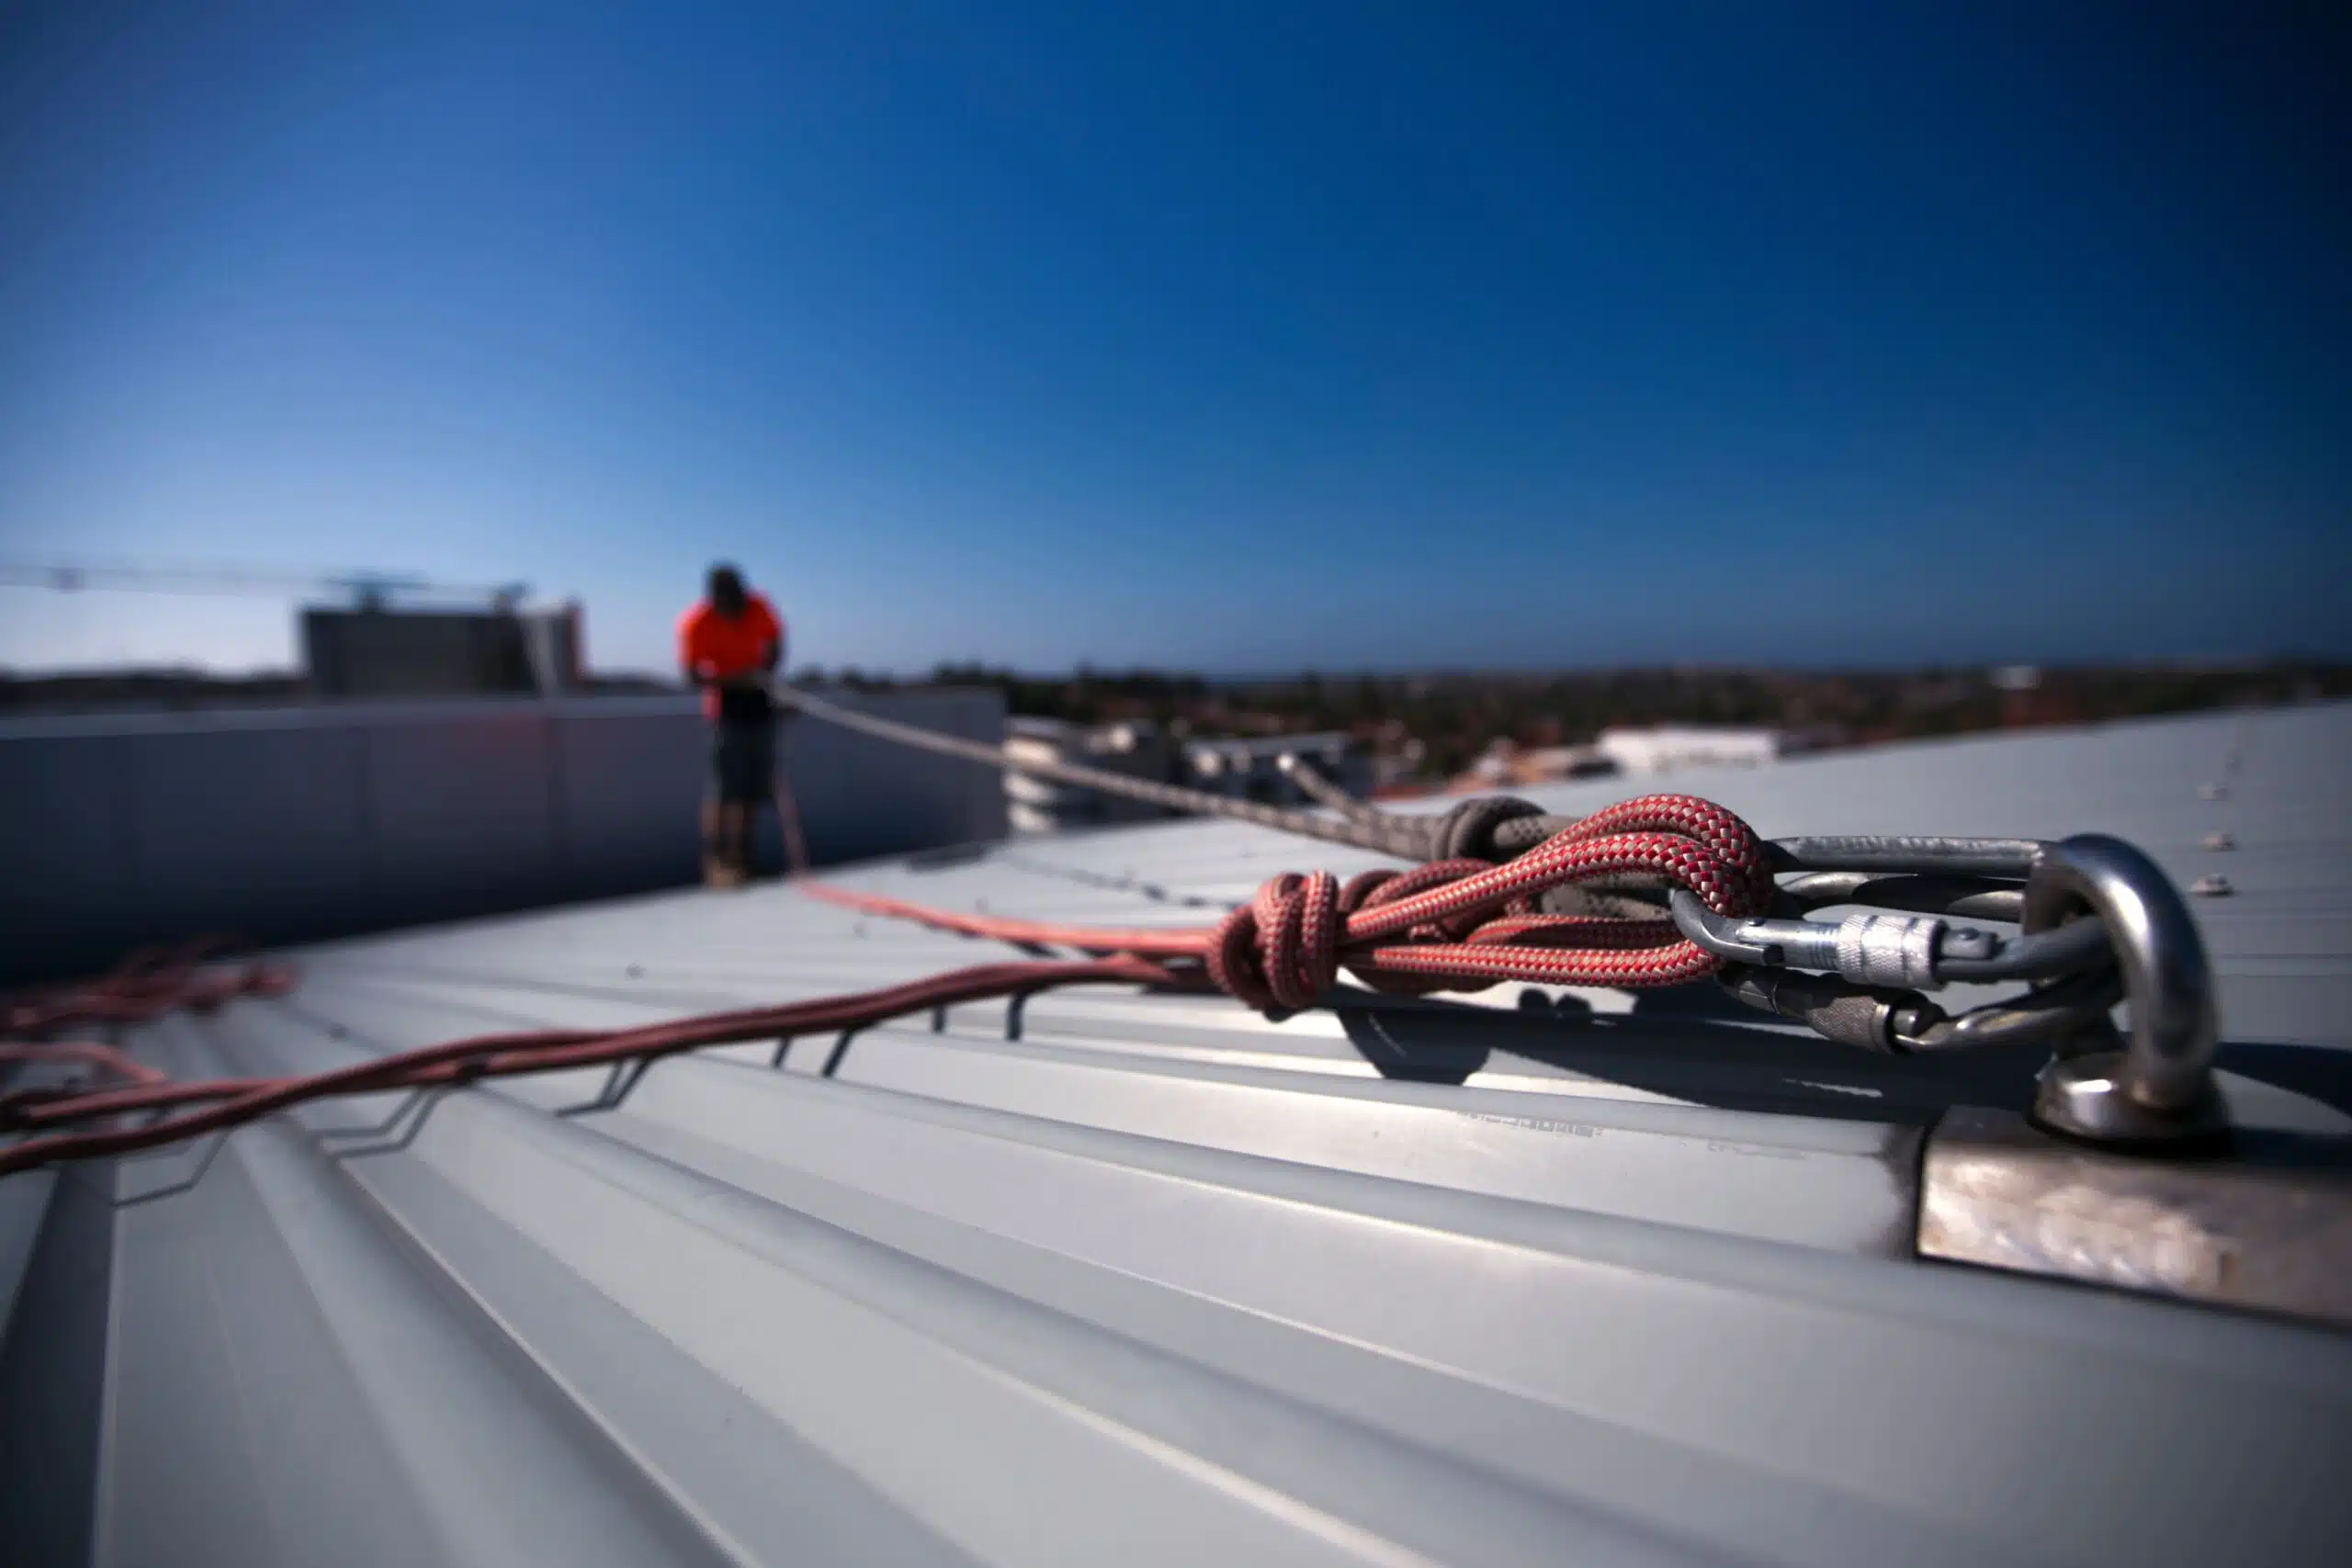 Fall protection testing keeps a rooftop worker safe